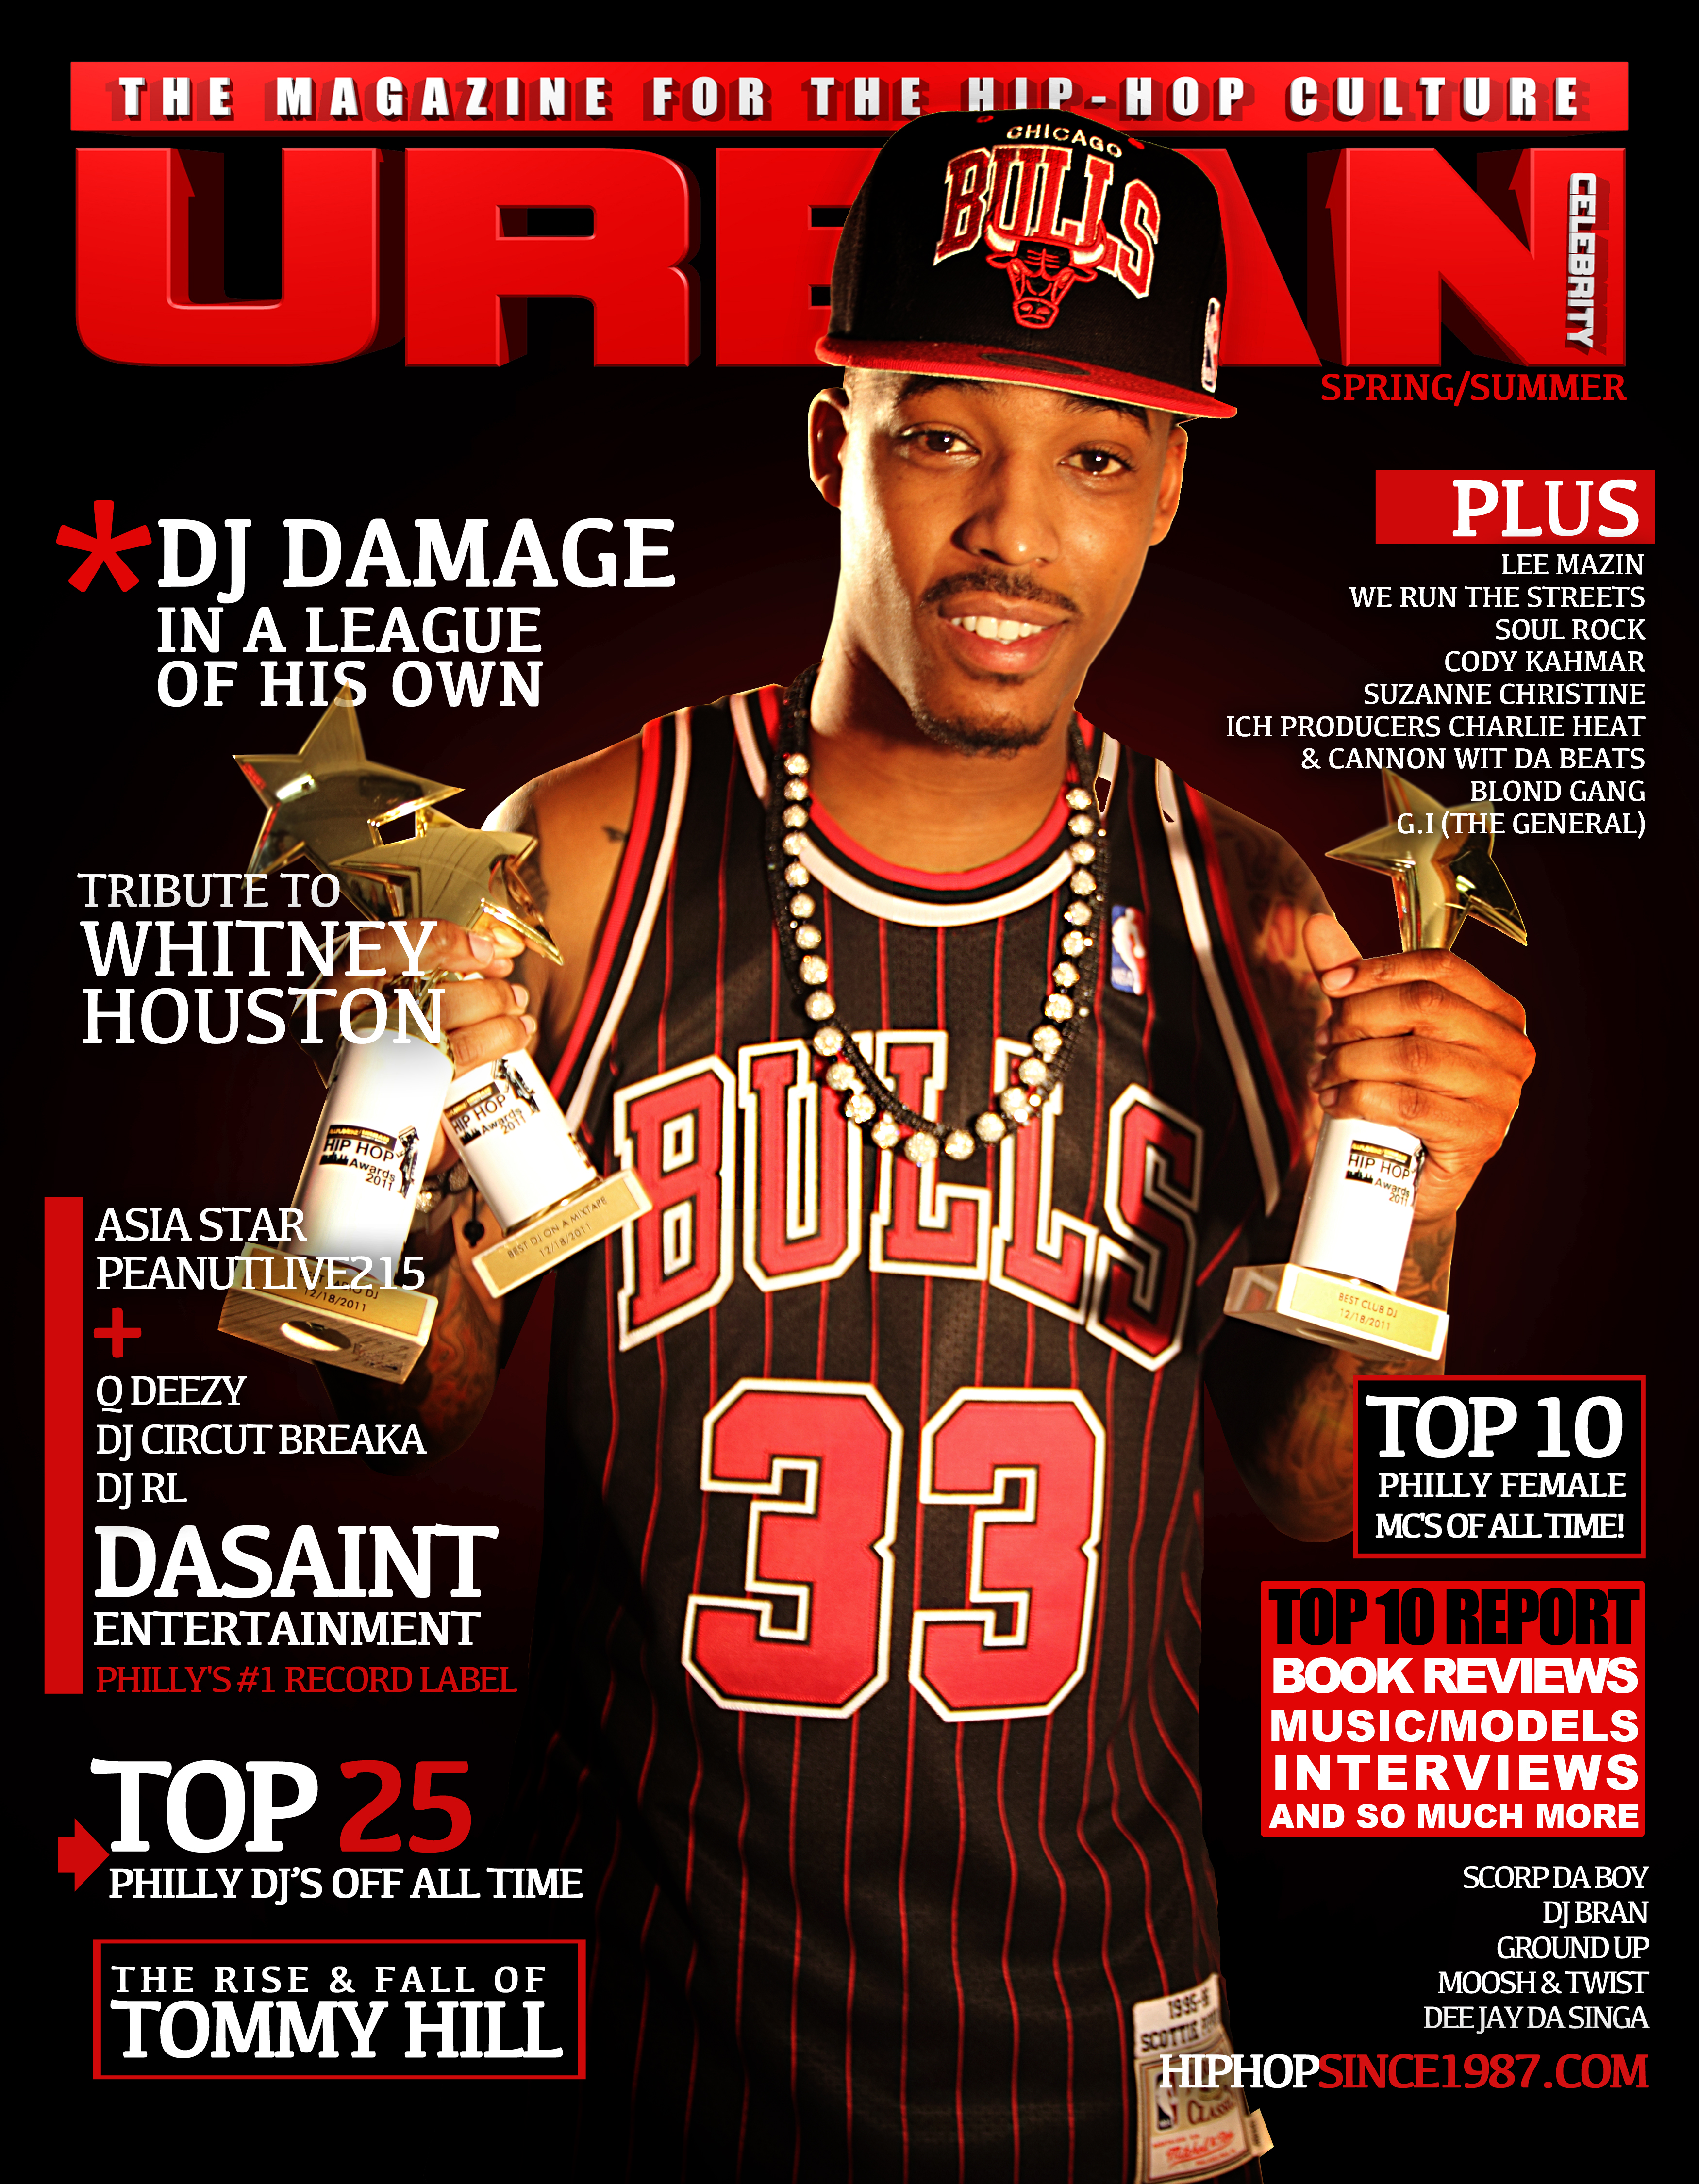 MAG-COVER HipHopSince1987.com Will Be Featured in The May Issue of Urban Celebrity Magazine  